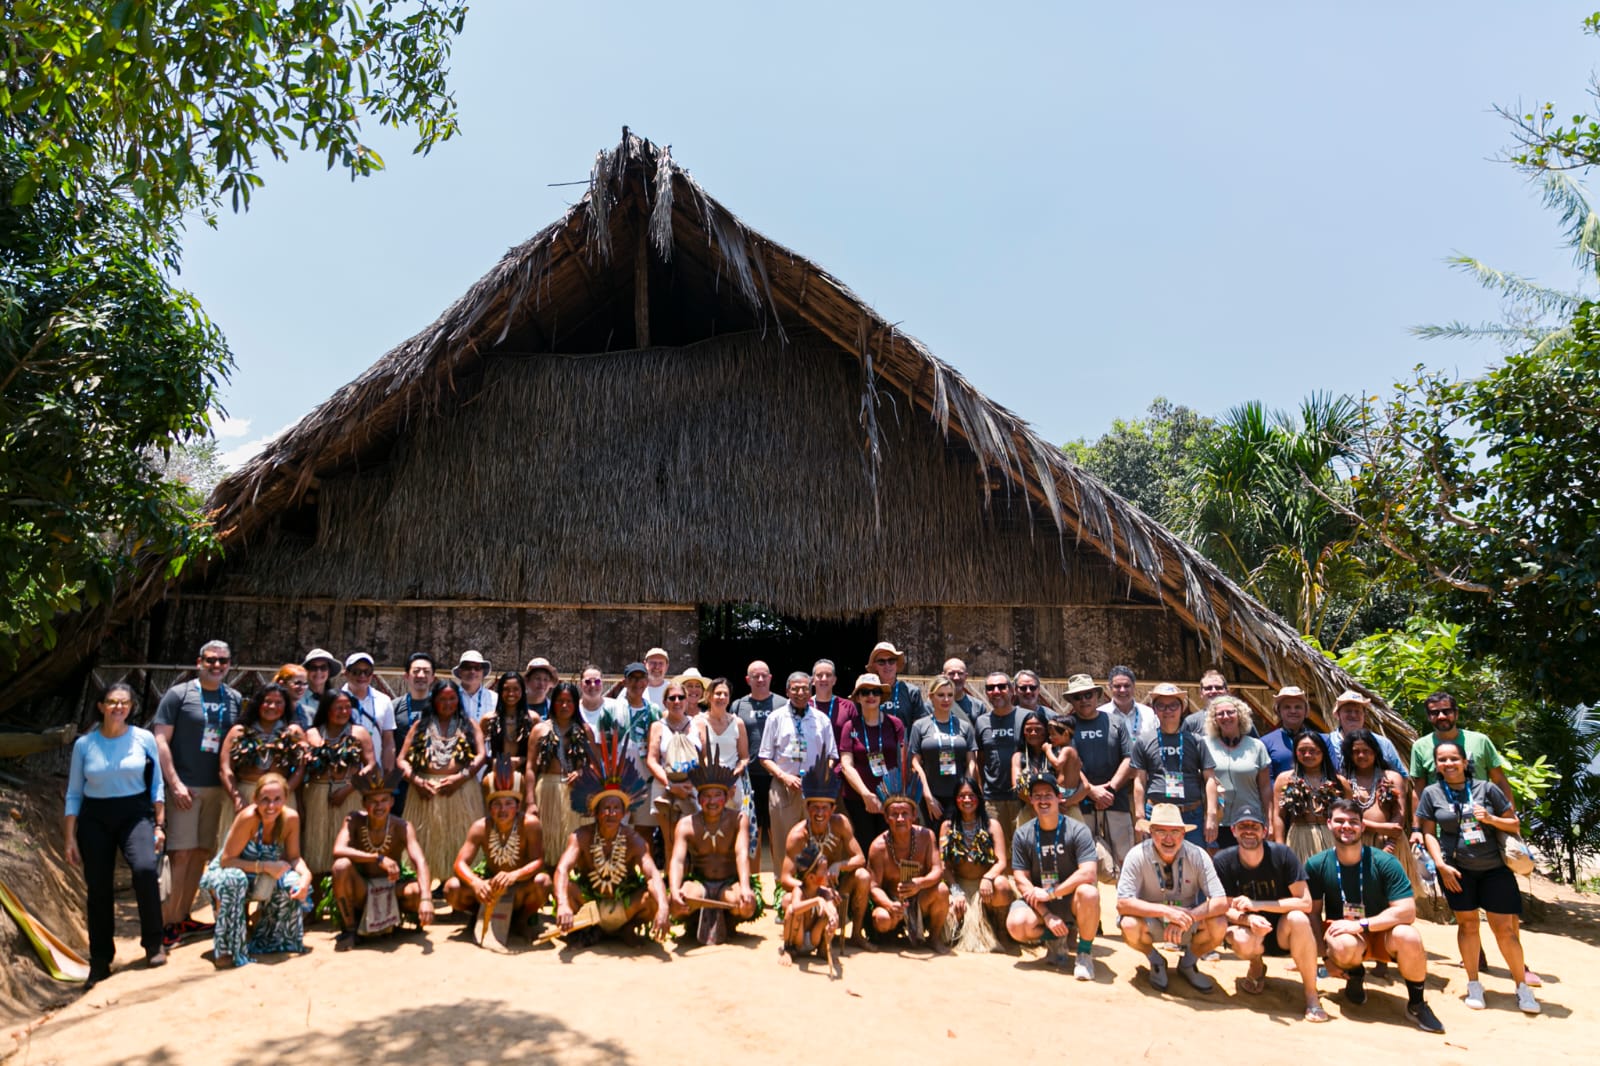 Country representatives participate in immersion in the Amazon with sustainable approaches